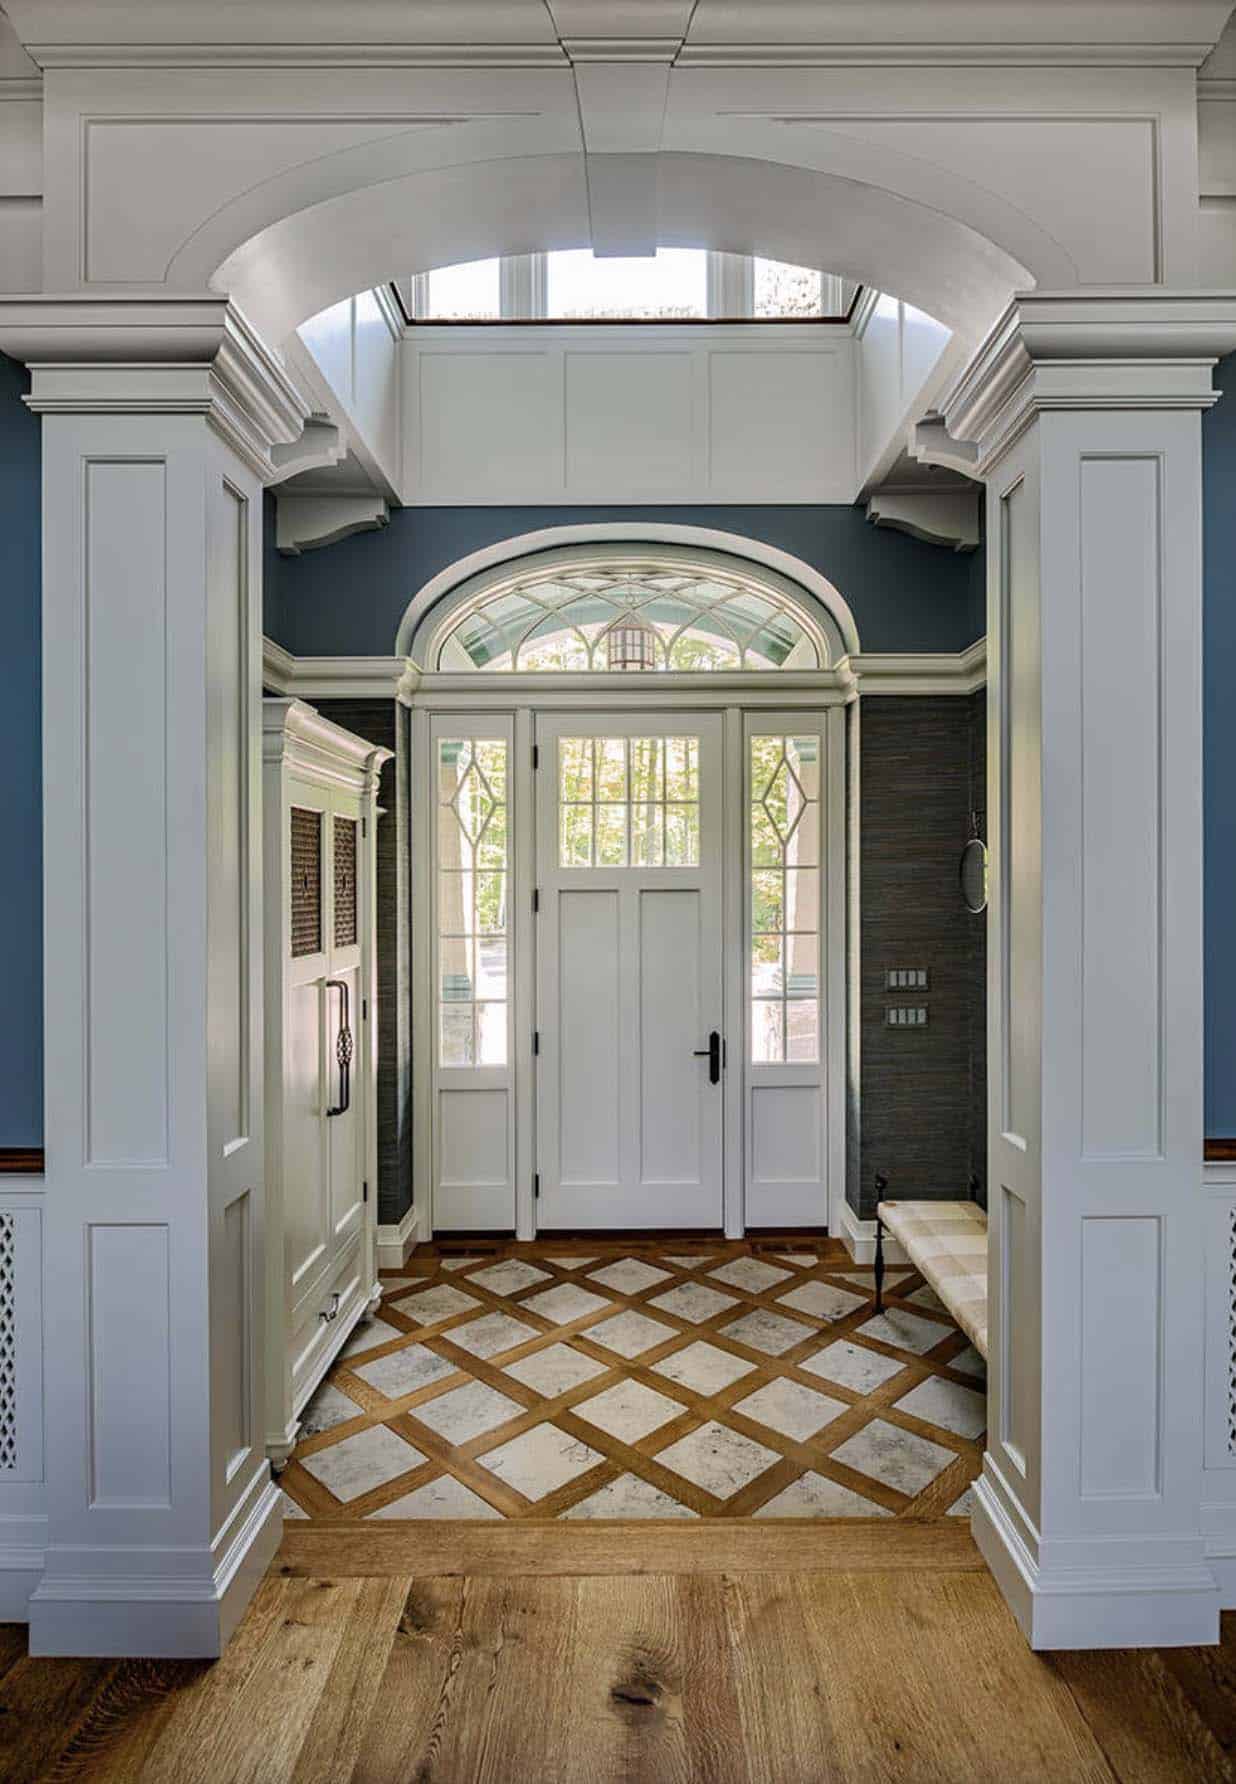 Grand home entryway with tile and hardwood floors